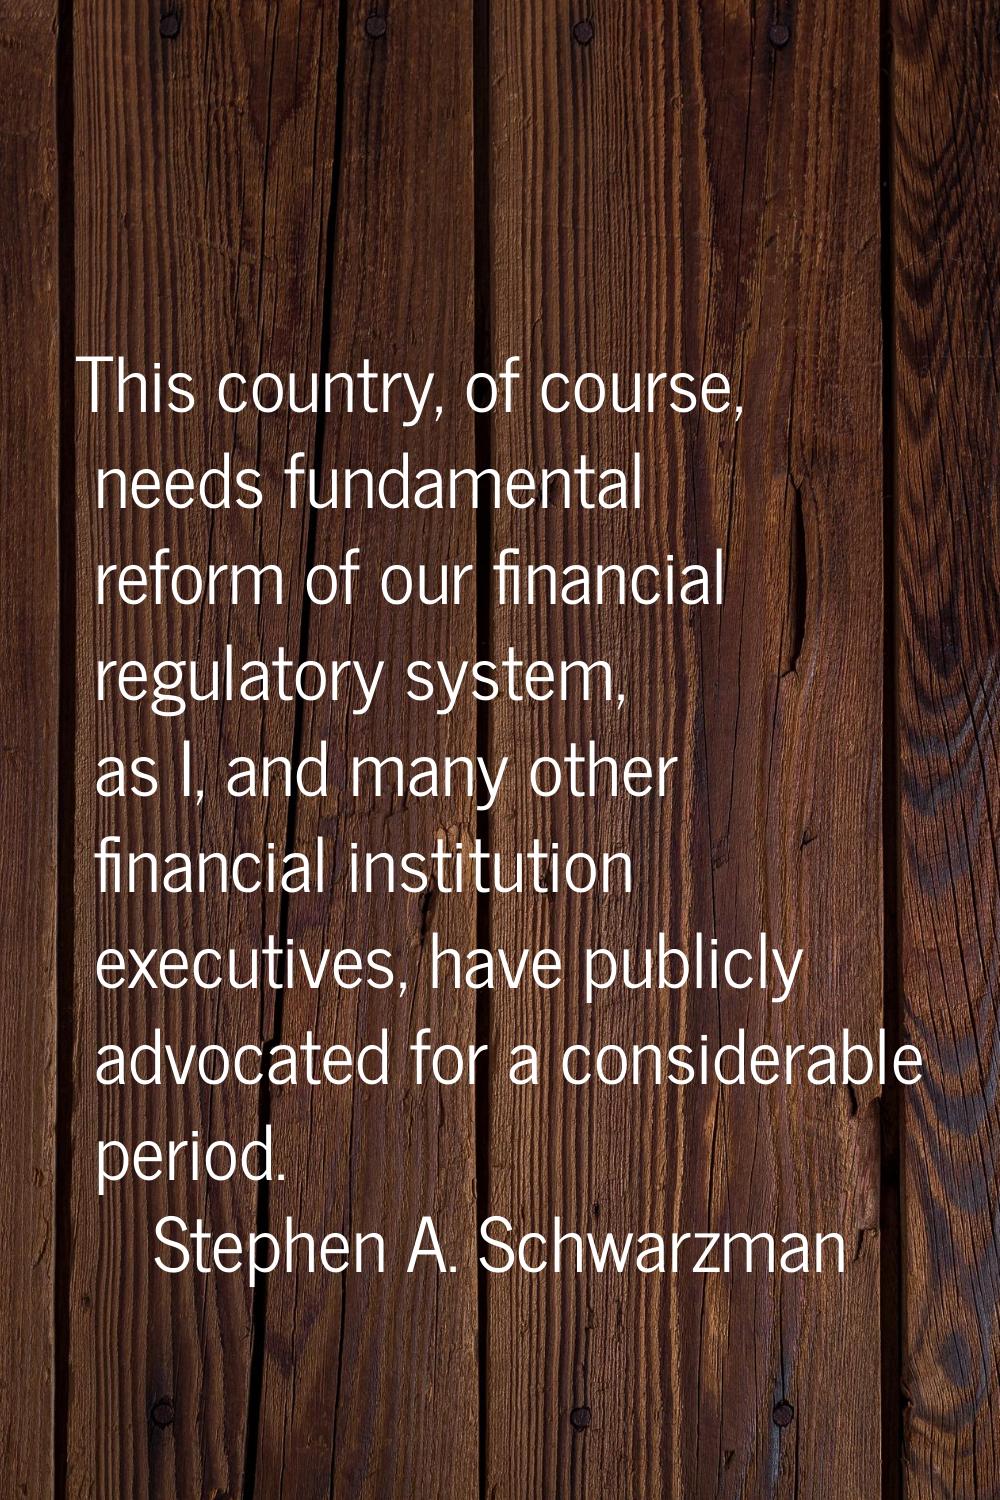 This country, of course, needs fundamental reform of our financial regulatory system, as I, and man